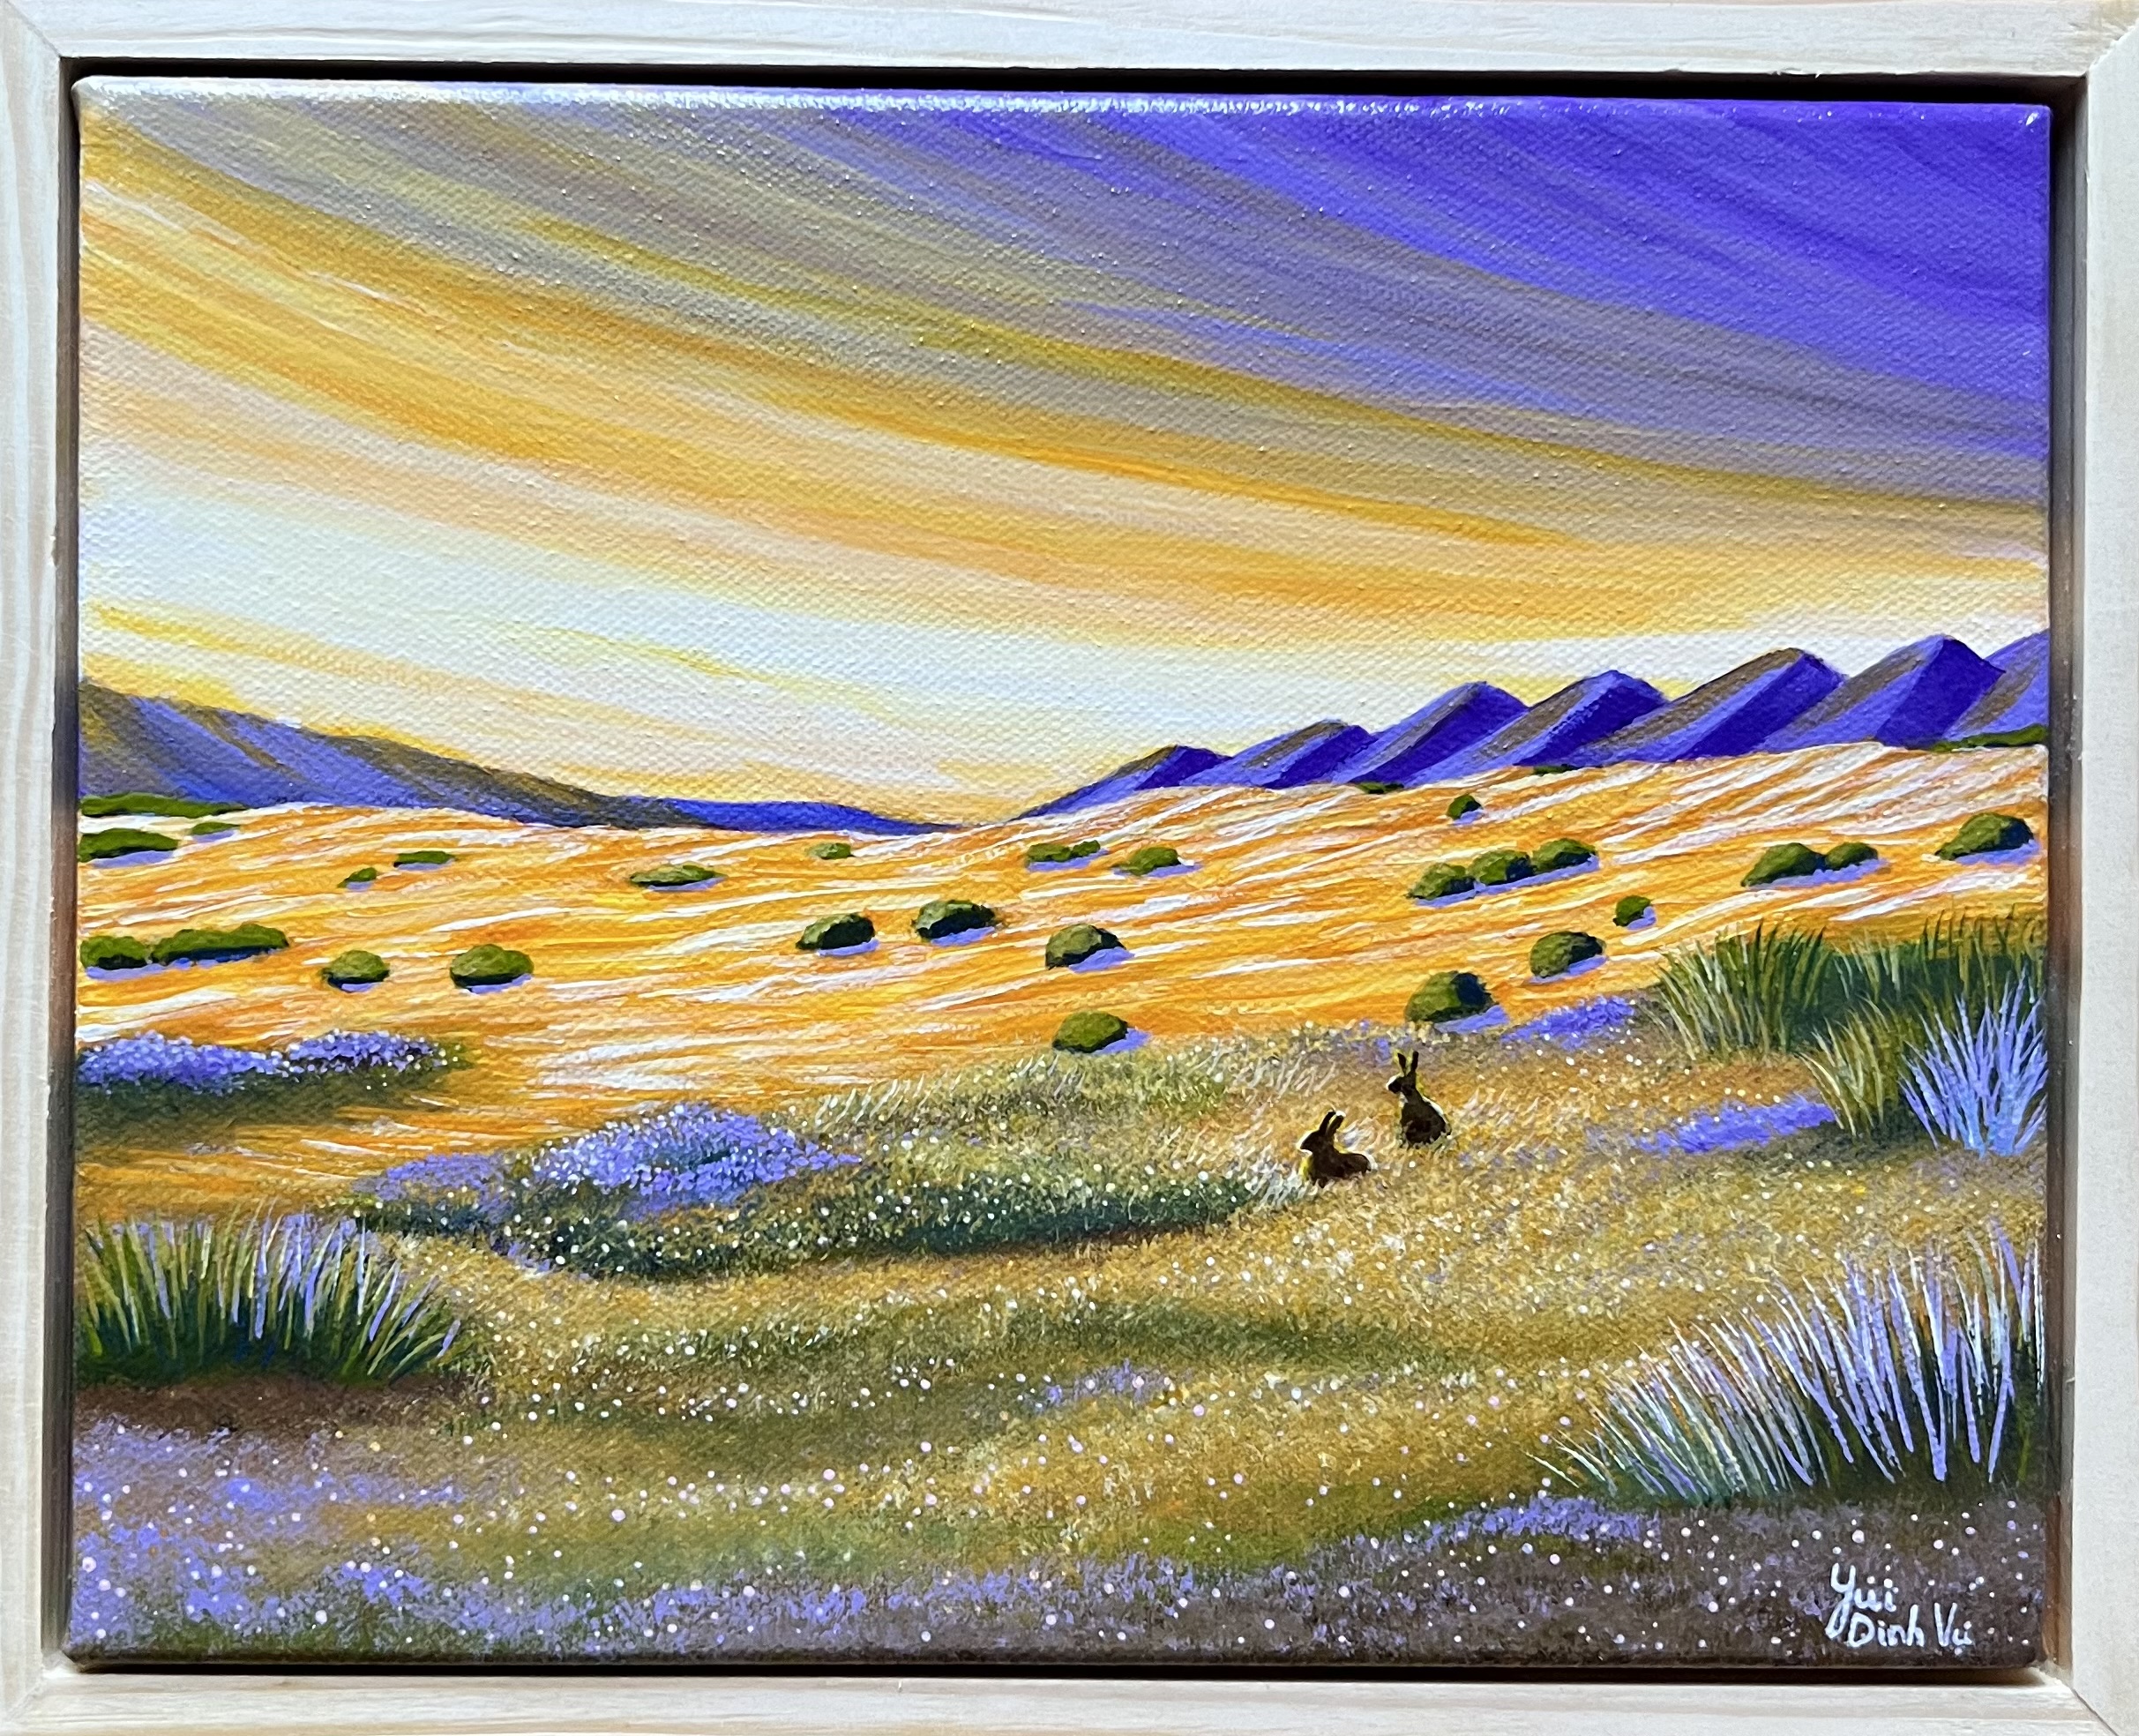 Abstract landscape acrylic painting - The Wild Lands 2 by Lamice Ali